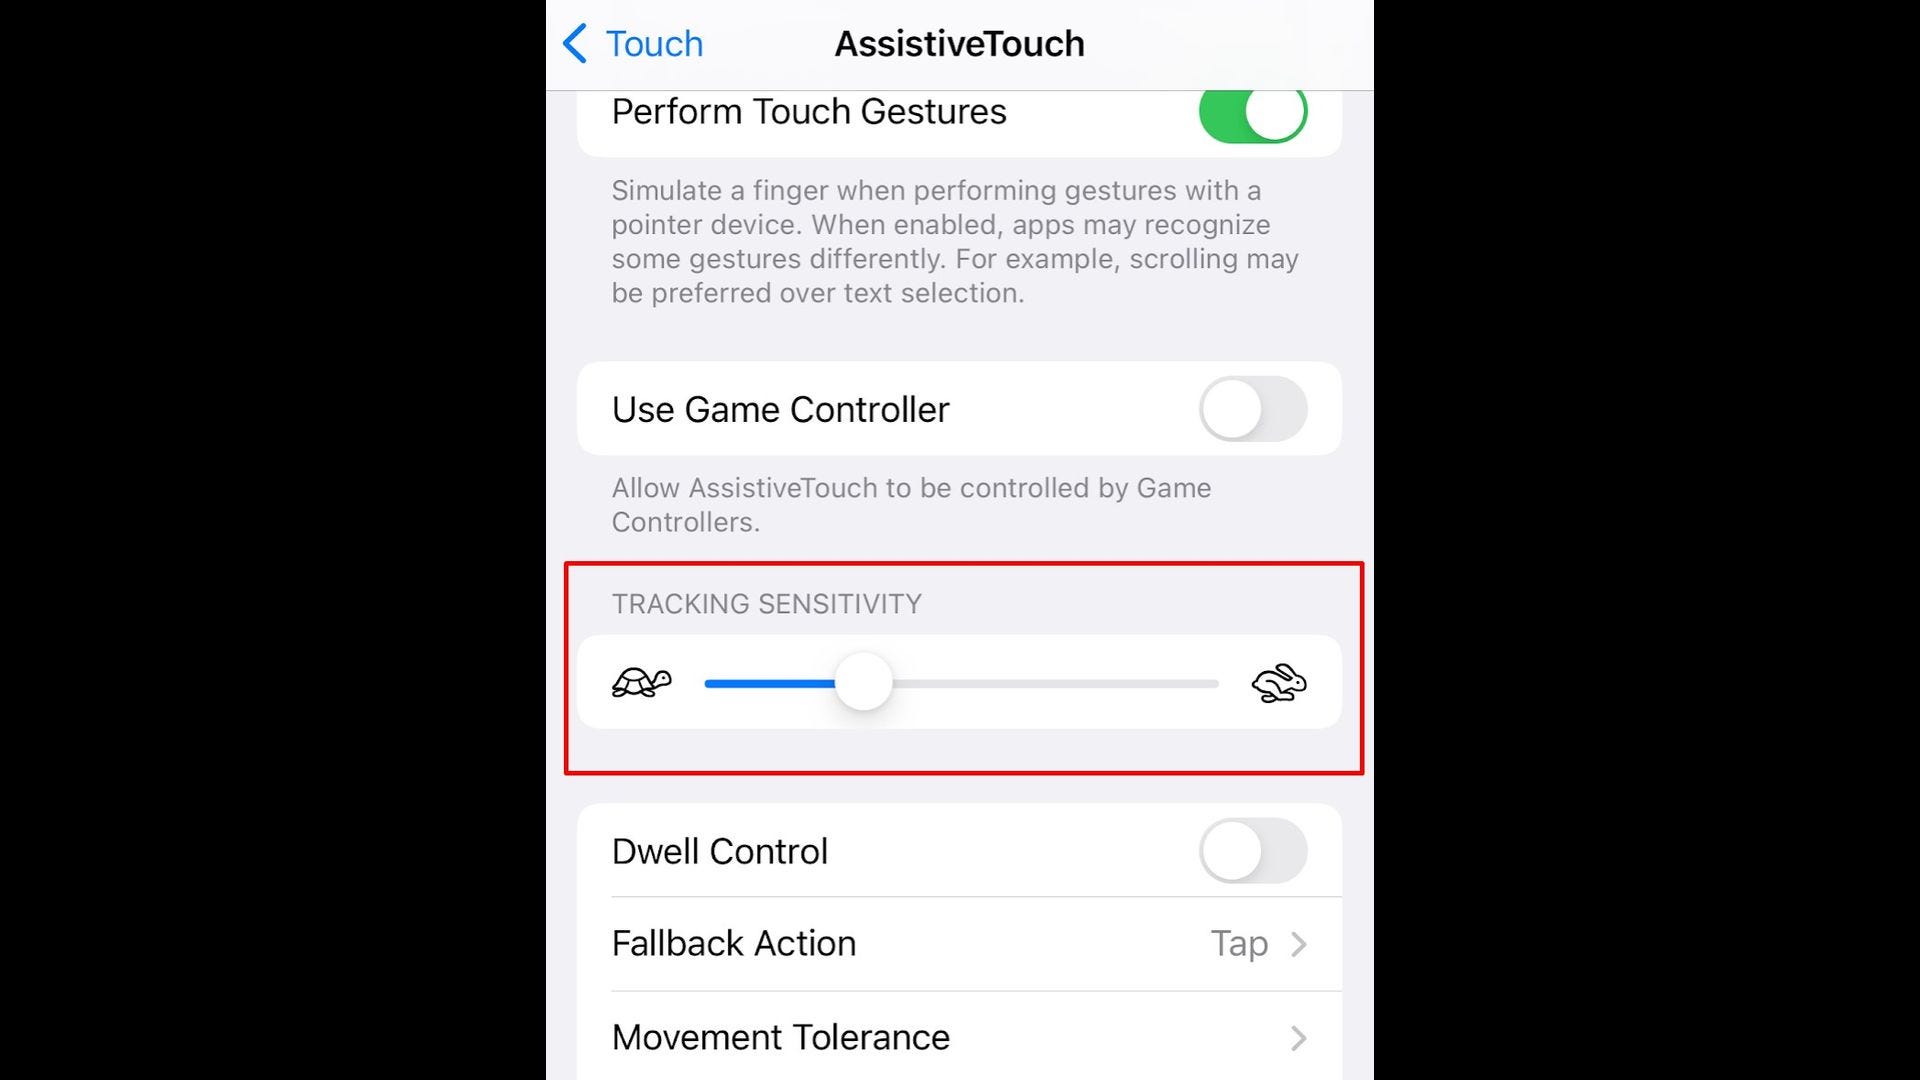 in AssistiveTouch, adjust the slider based on your speed preferences